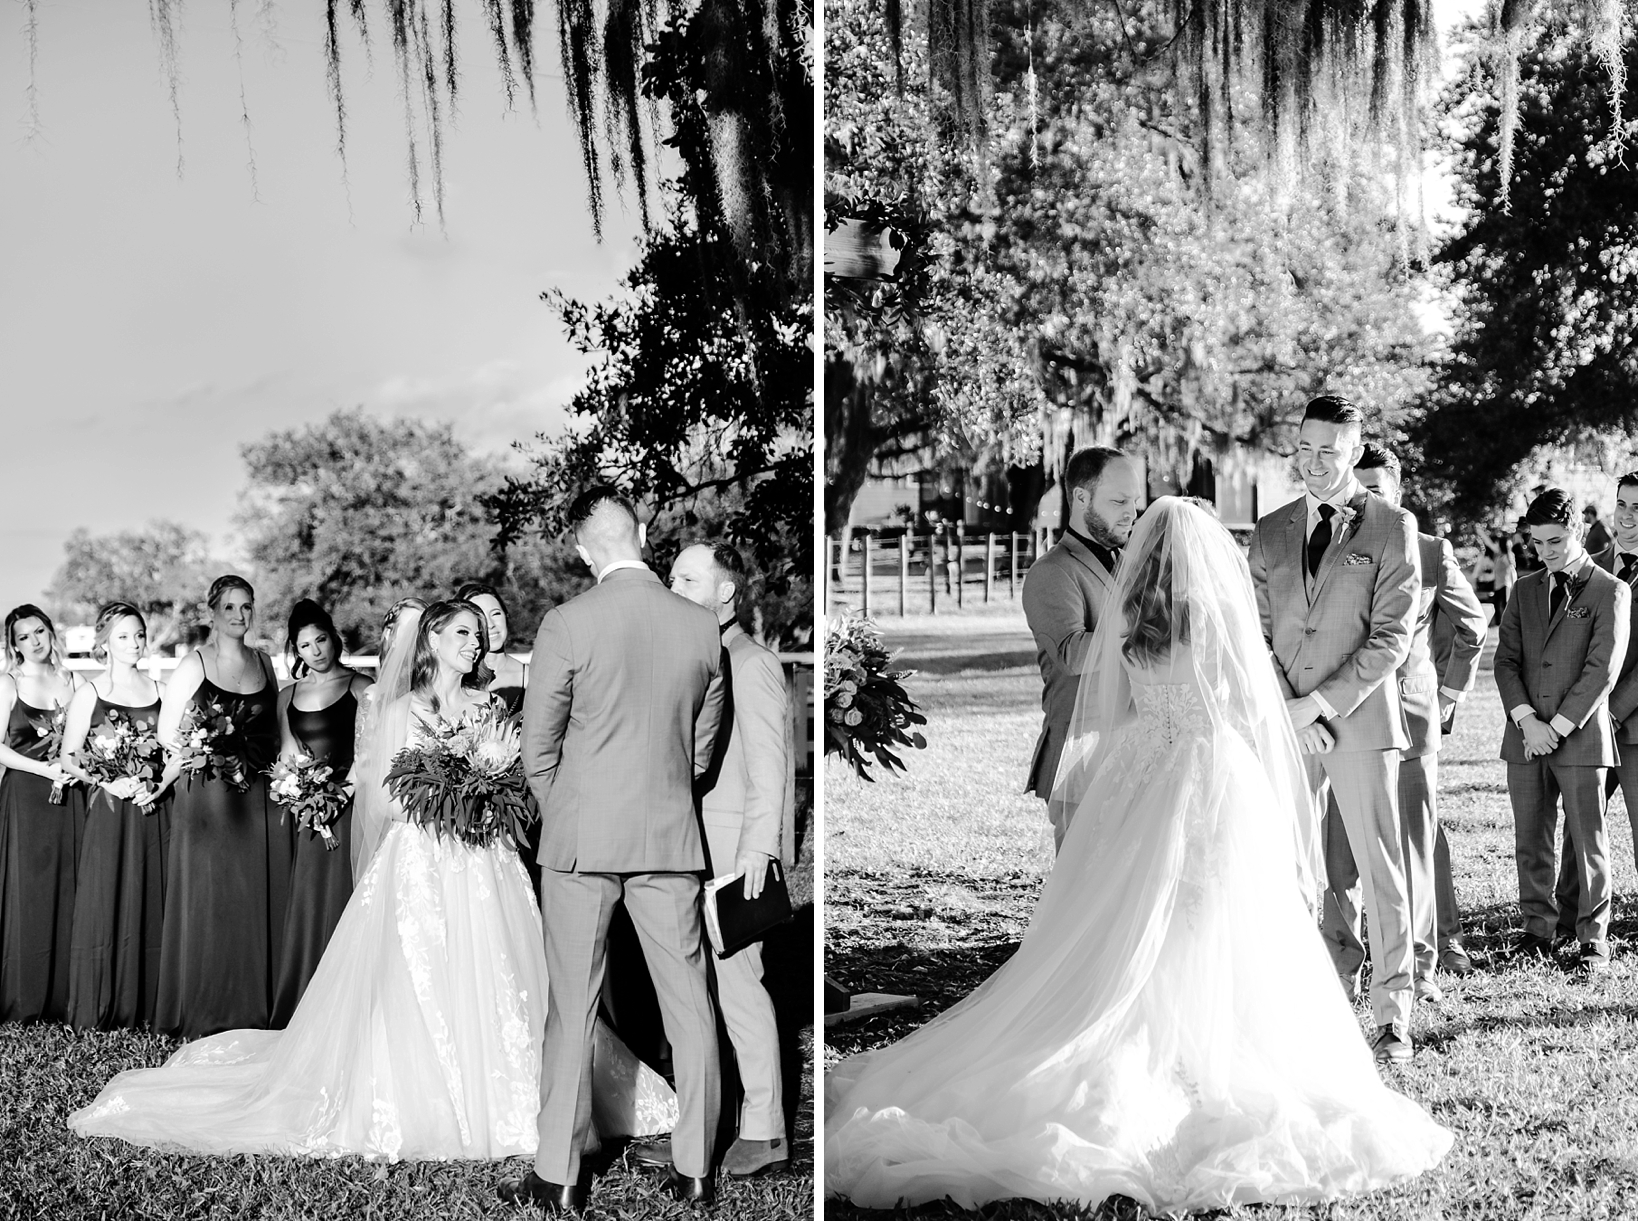 Black and white images of the wedding ceremony